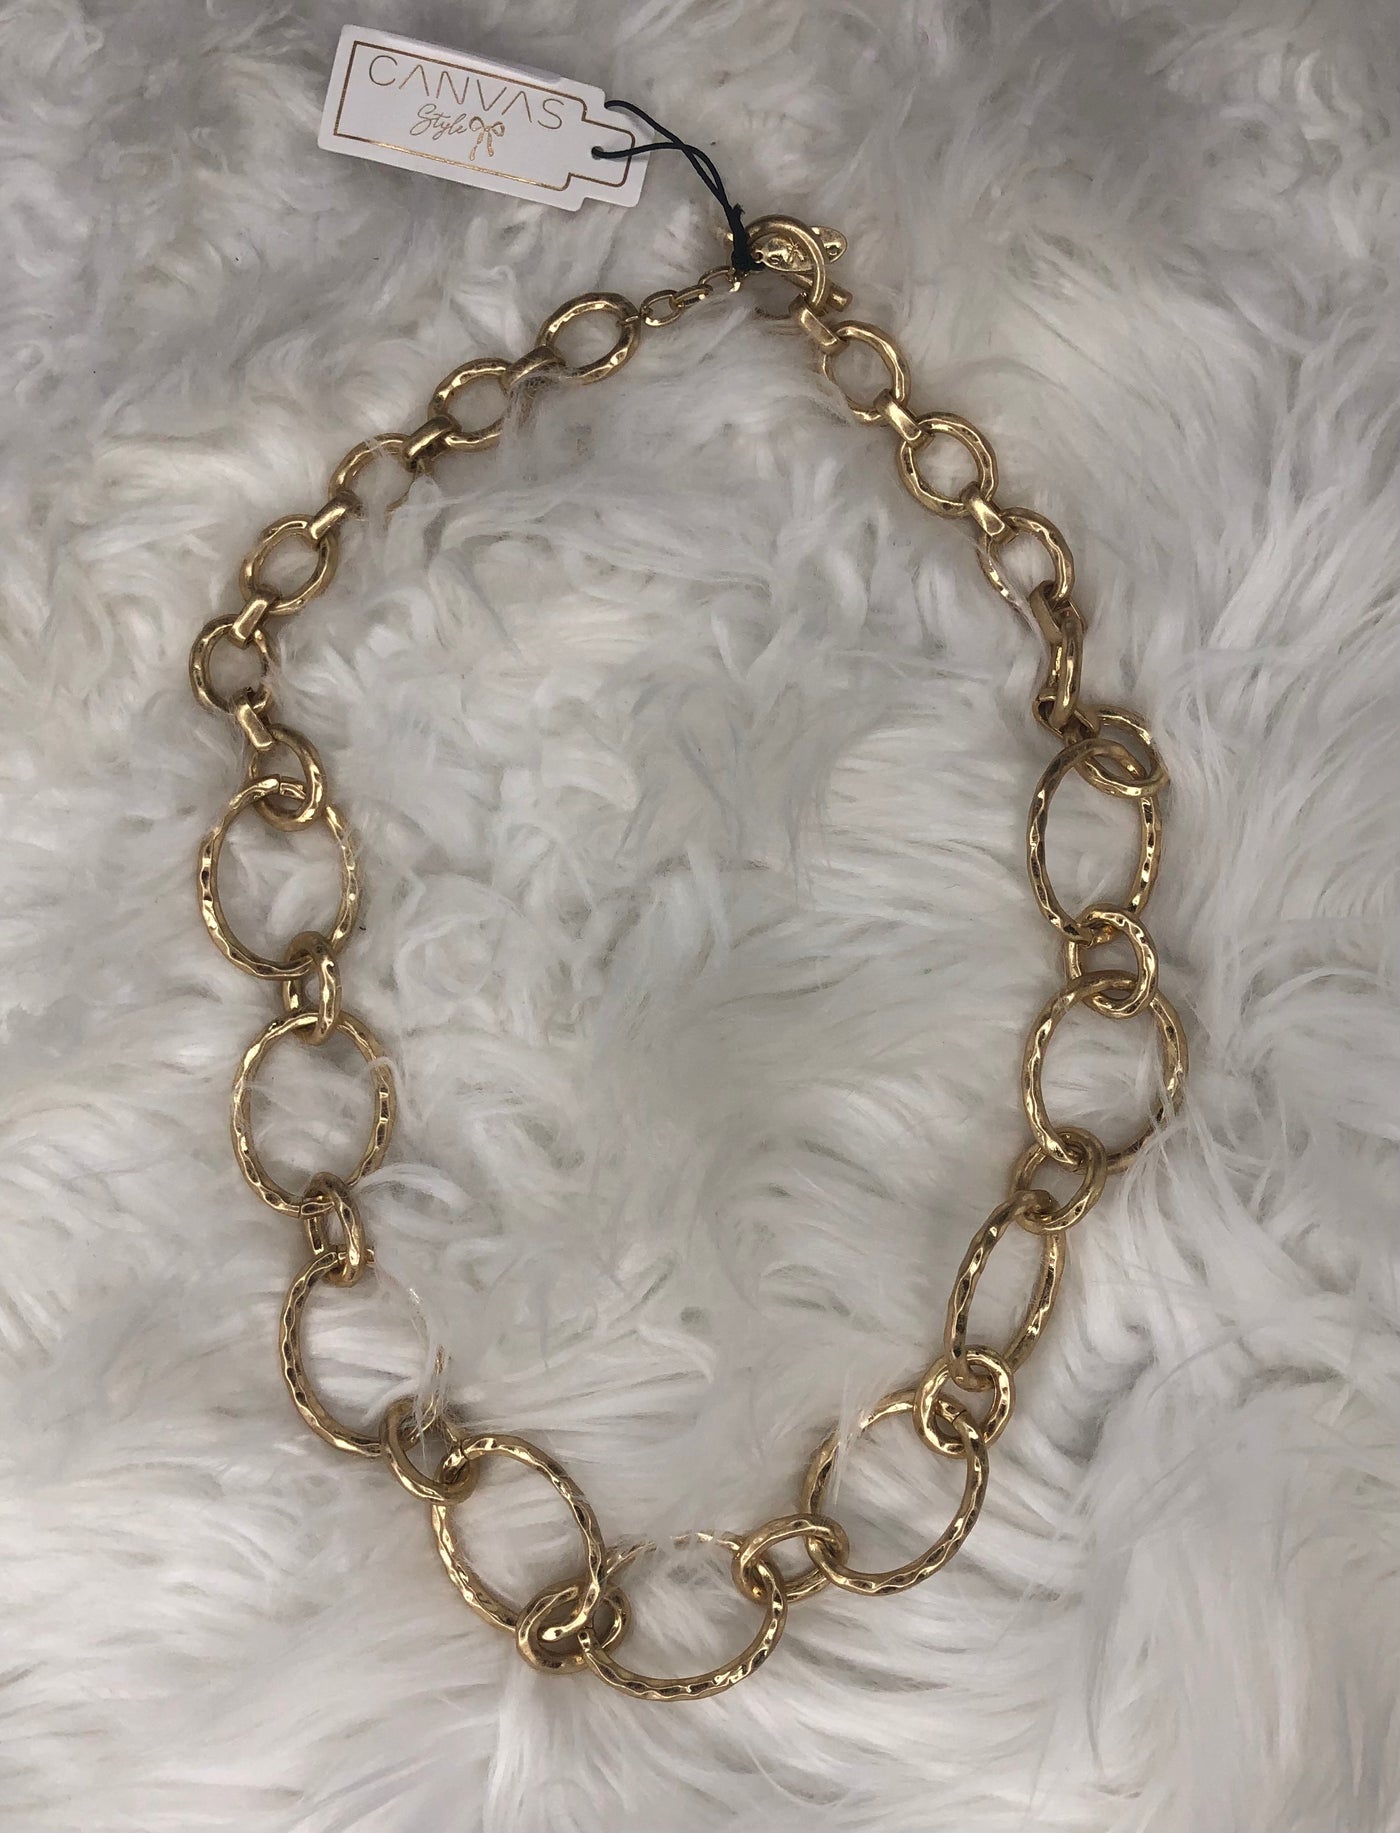 Canvas Jewelry Bliss Hammered Chain Link Statement Necklace Worn Gold